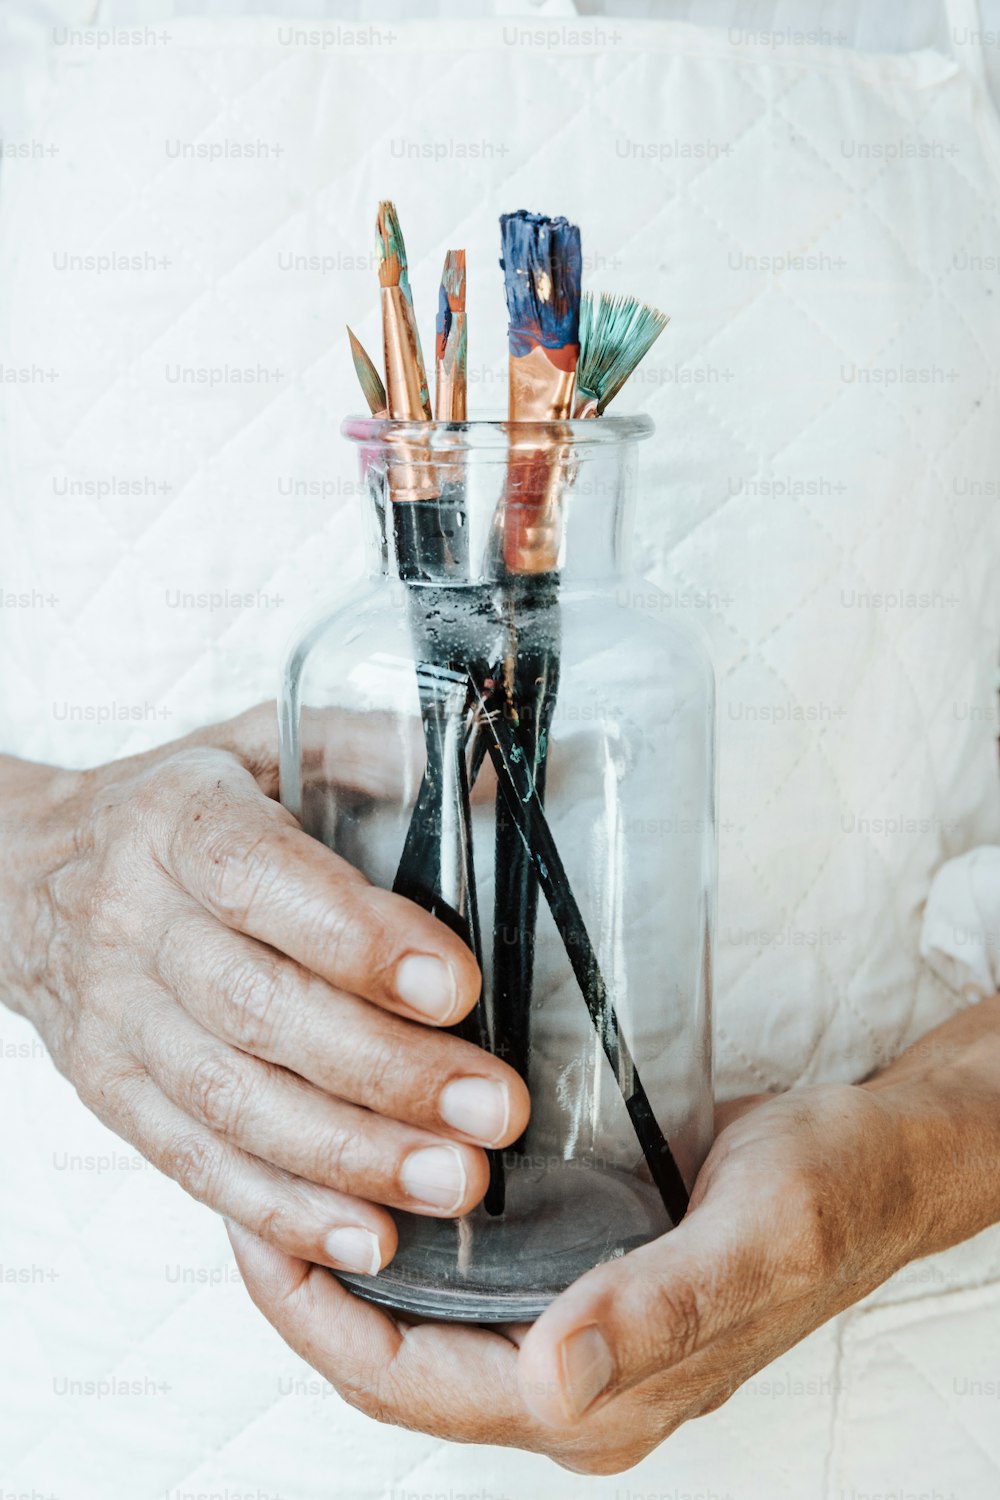 a person holding a jar filled with pens and pencils